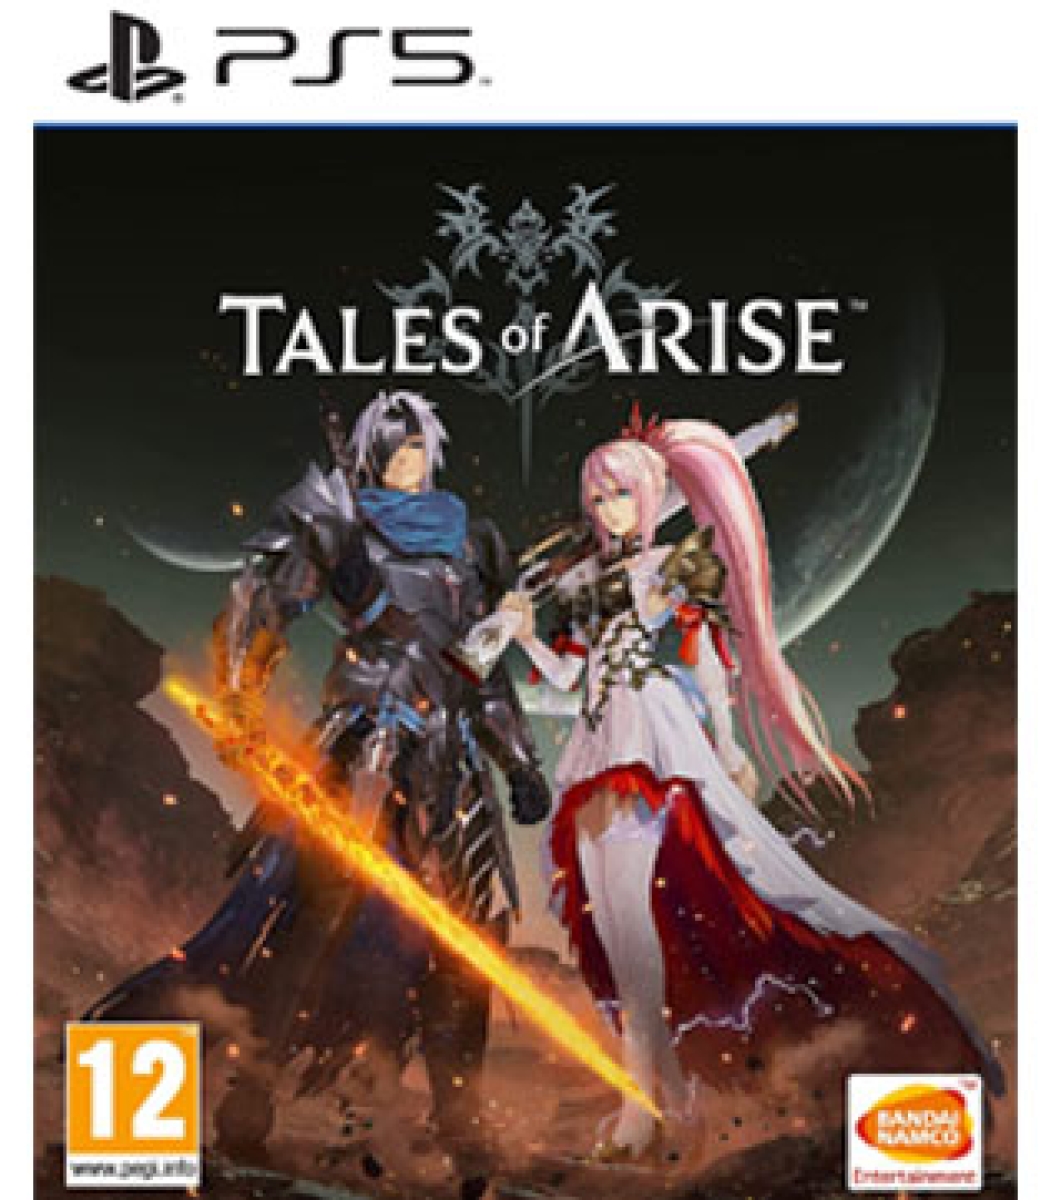 Tales of Arise PS5